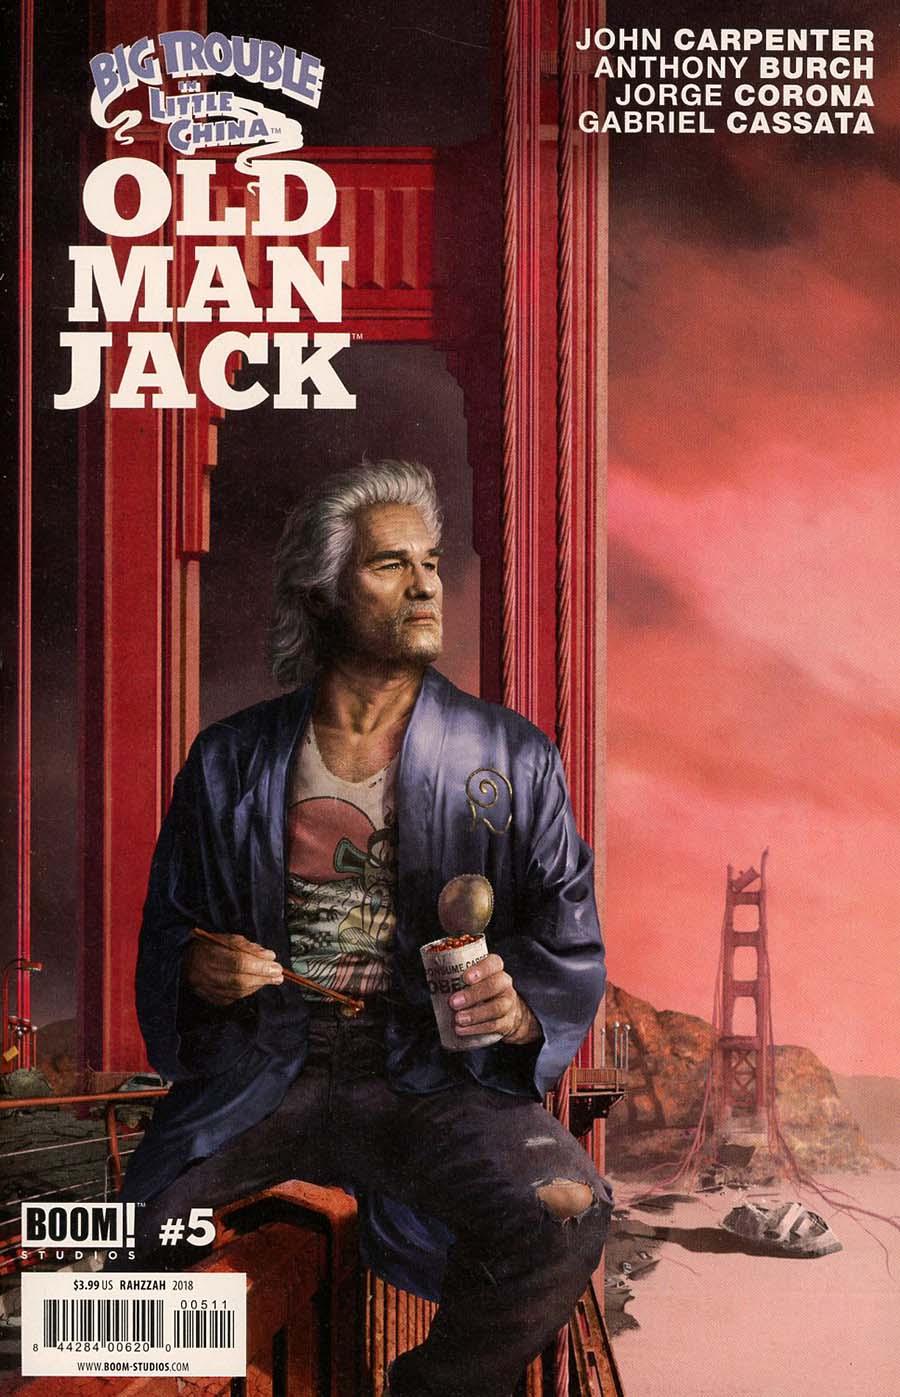 Big Trouble In Little China Old Man Jack Vol. 1 #5